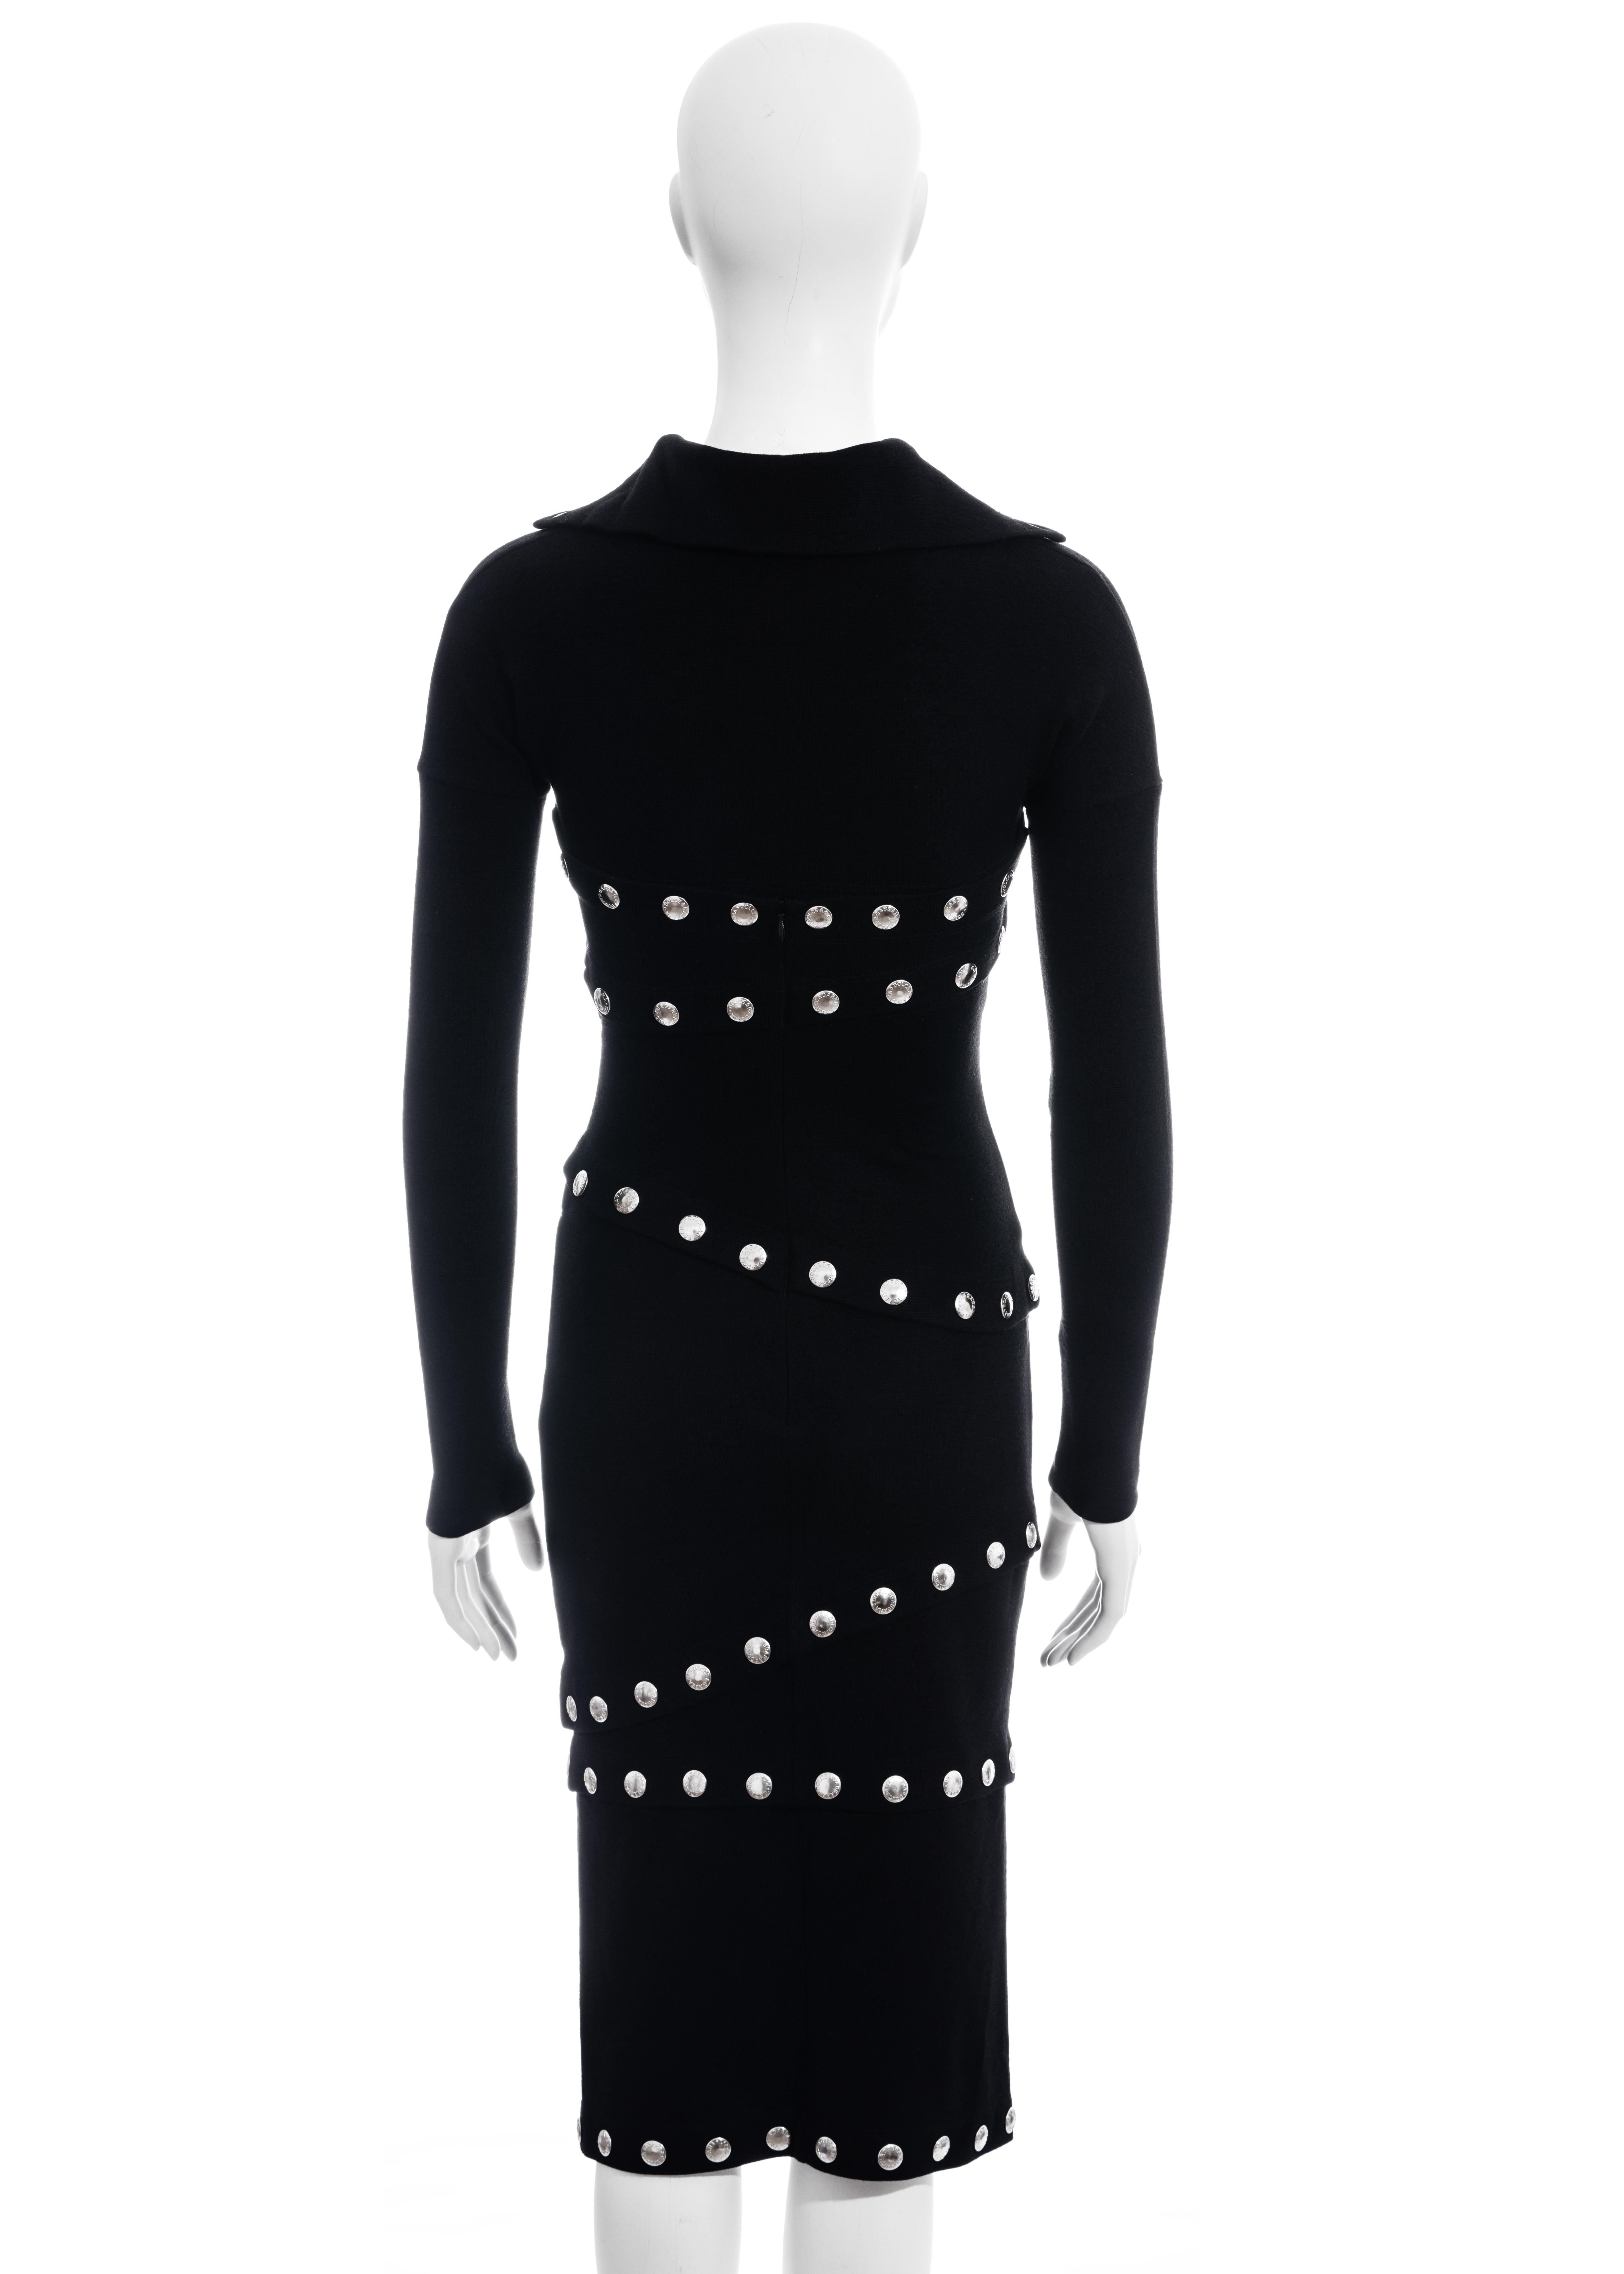 Dolce & Gabbana black wool jersey dress with silver press studs, fw 2003 For Sale 1